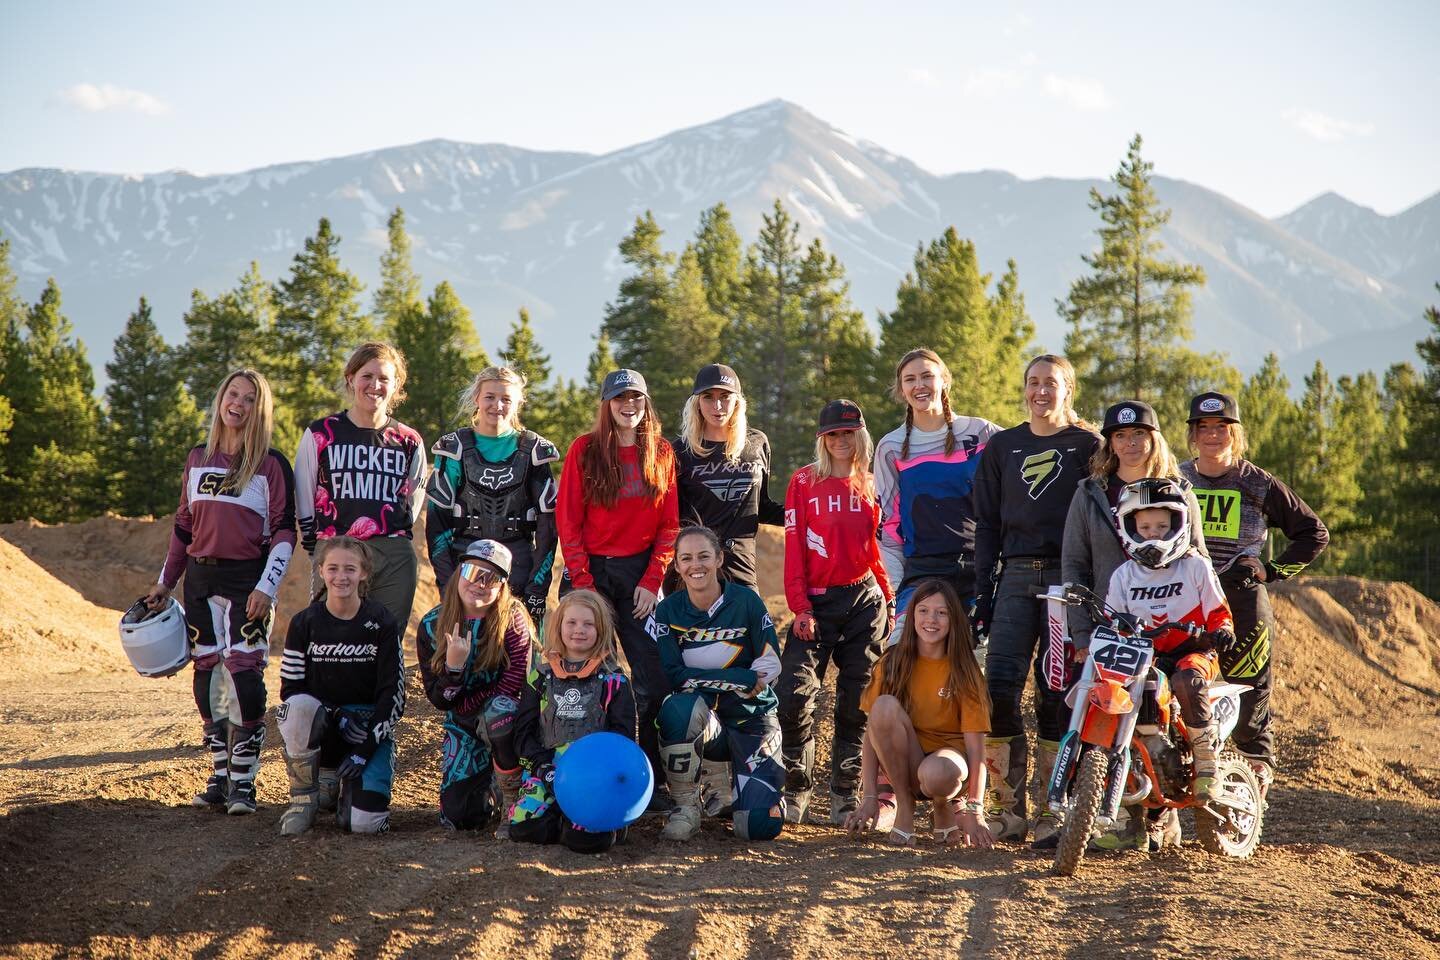 #community 

See you at @leadvillemotopark tonight for our #toosday sesh! 

Don&rsquo;t forget to register for the #GRT portion on the site. 

#dirtbikes #moto #motocross #notyouraverageladiesnight #coloradomoto #women #womenwhoride 📸 @japanesecowbo